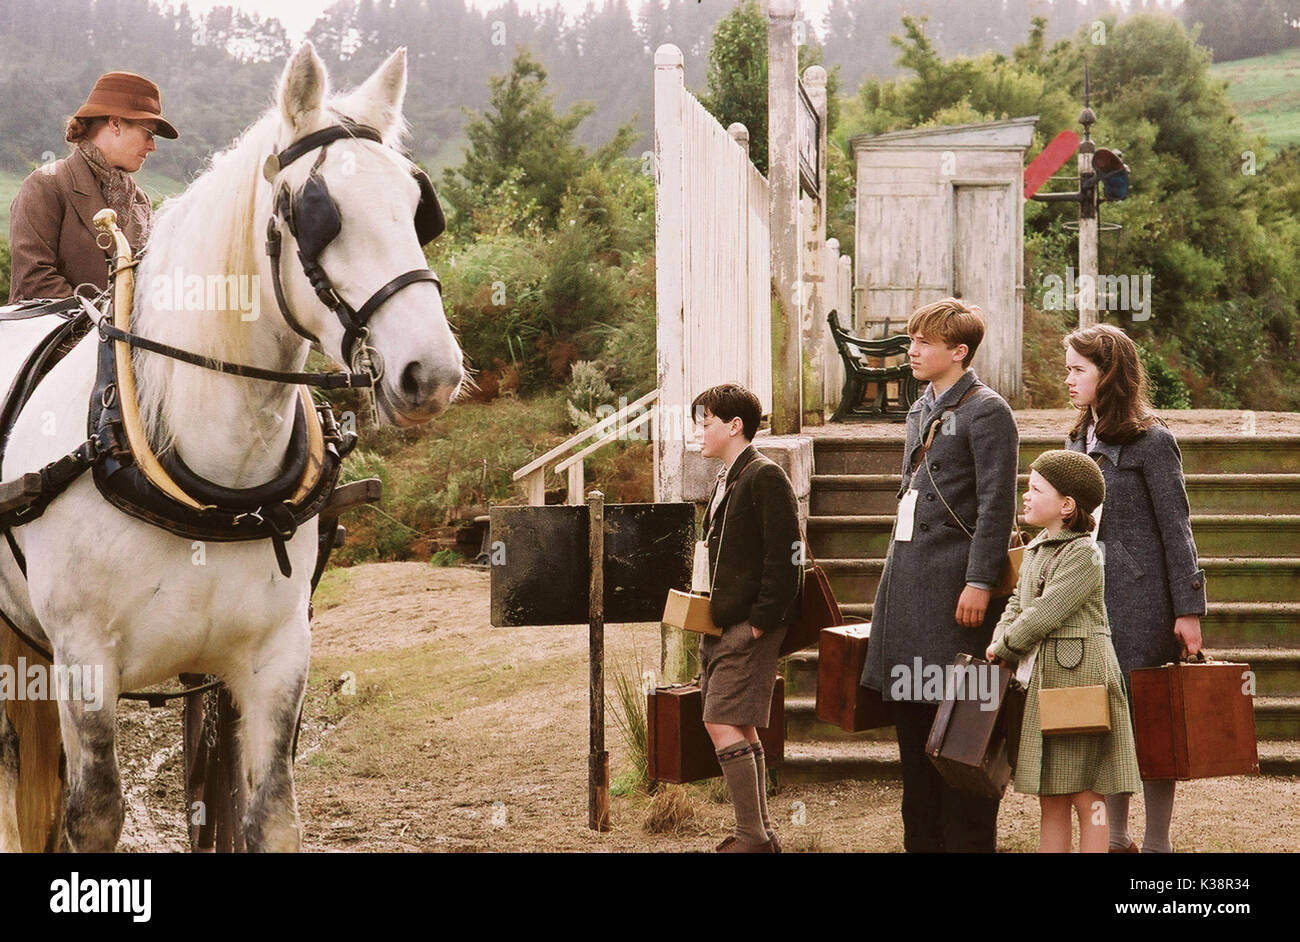 Pictured l-r: Mrs. Macready greets the children, Edmund (SKANDAR KEYNES), Peter (WILLIAM MOSELEY), Lucy (GEORGIE HENLEY), and Susan (ANNA POPPLEWELL) in a scene from THE CHRONICLES OF NARNIA: THE LION, THE WITCH AND THE WARDROBE, directed by Andrew Adamson.  Distributed by Buena Vista International. THIS MATERIAL MAY BE LAWFULLY USED IN ALL MEDIA, EXCLUDING THE INTERNET, ONLY TO PROMOTE THE RELEASE OF THE MOTION PICTU Stock Photo